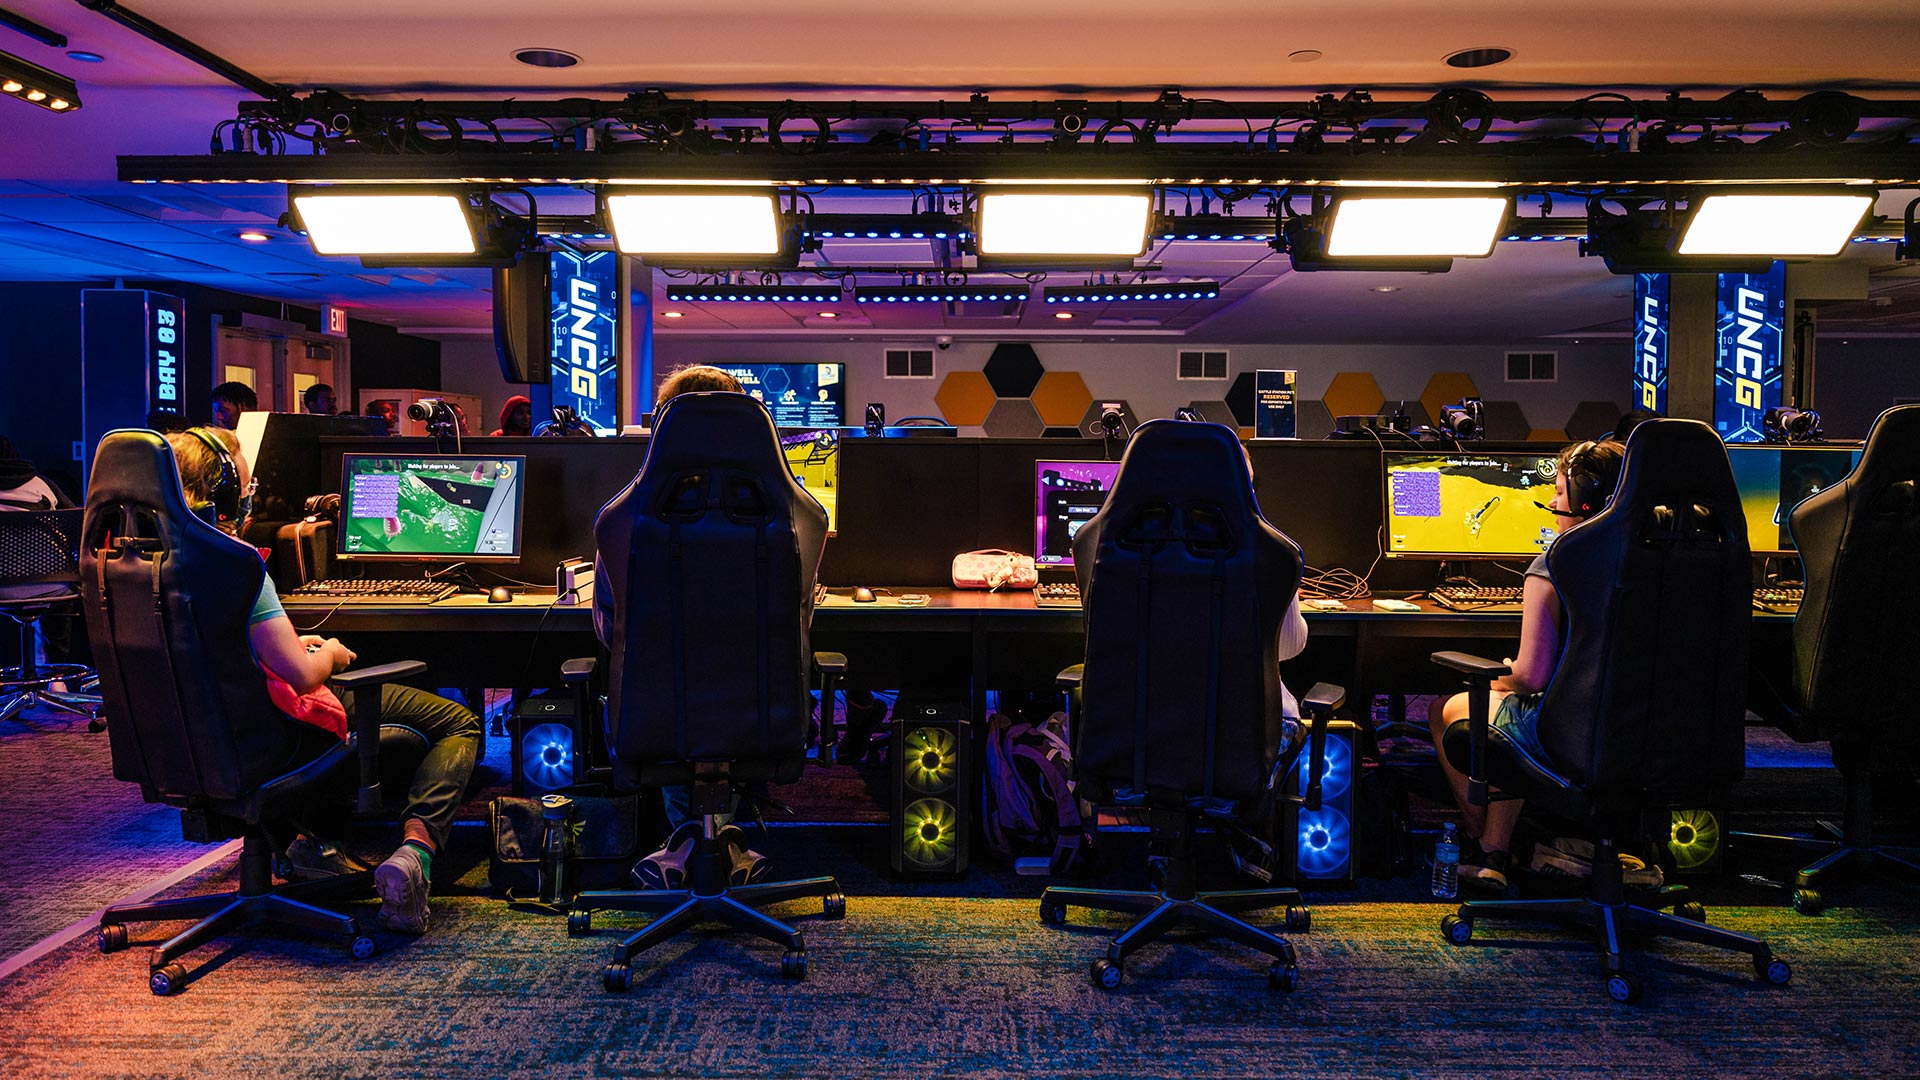 Four students sitting at Esports computer consoles.